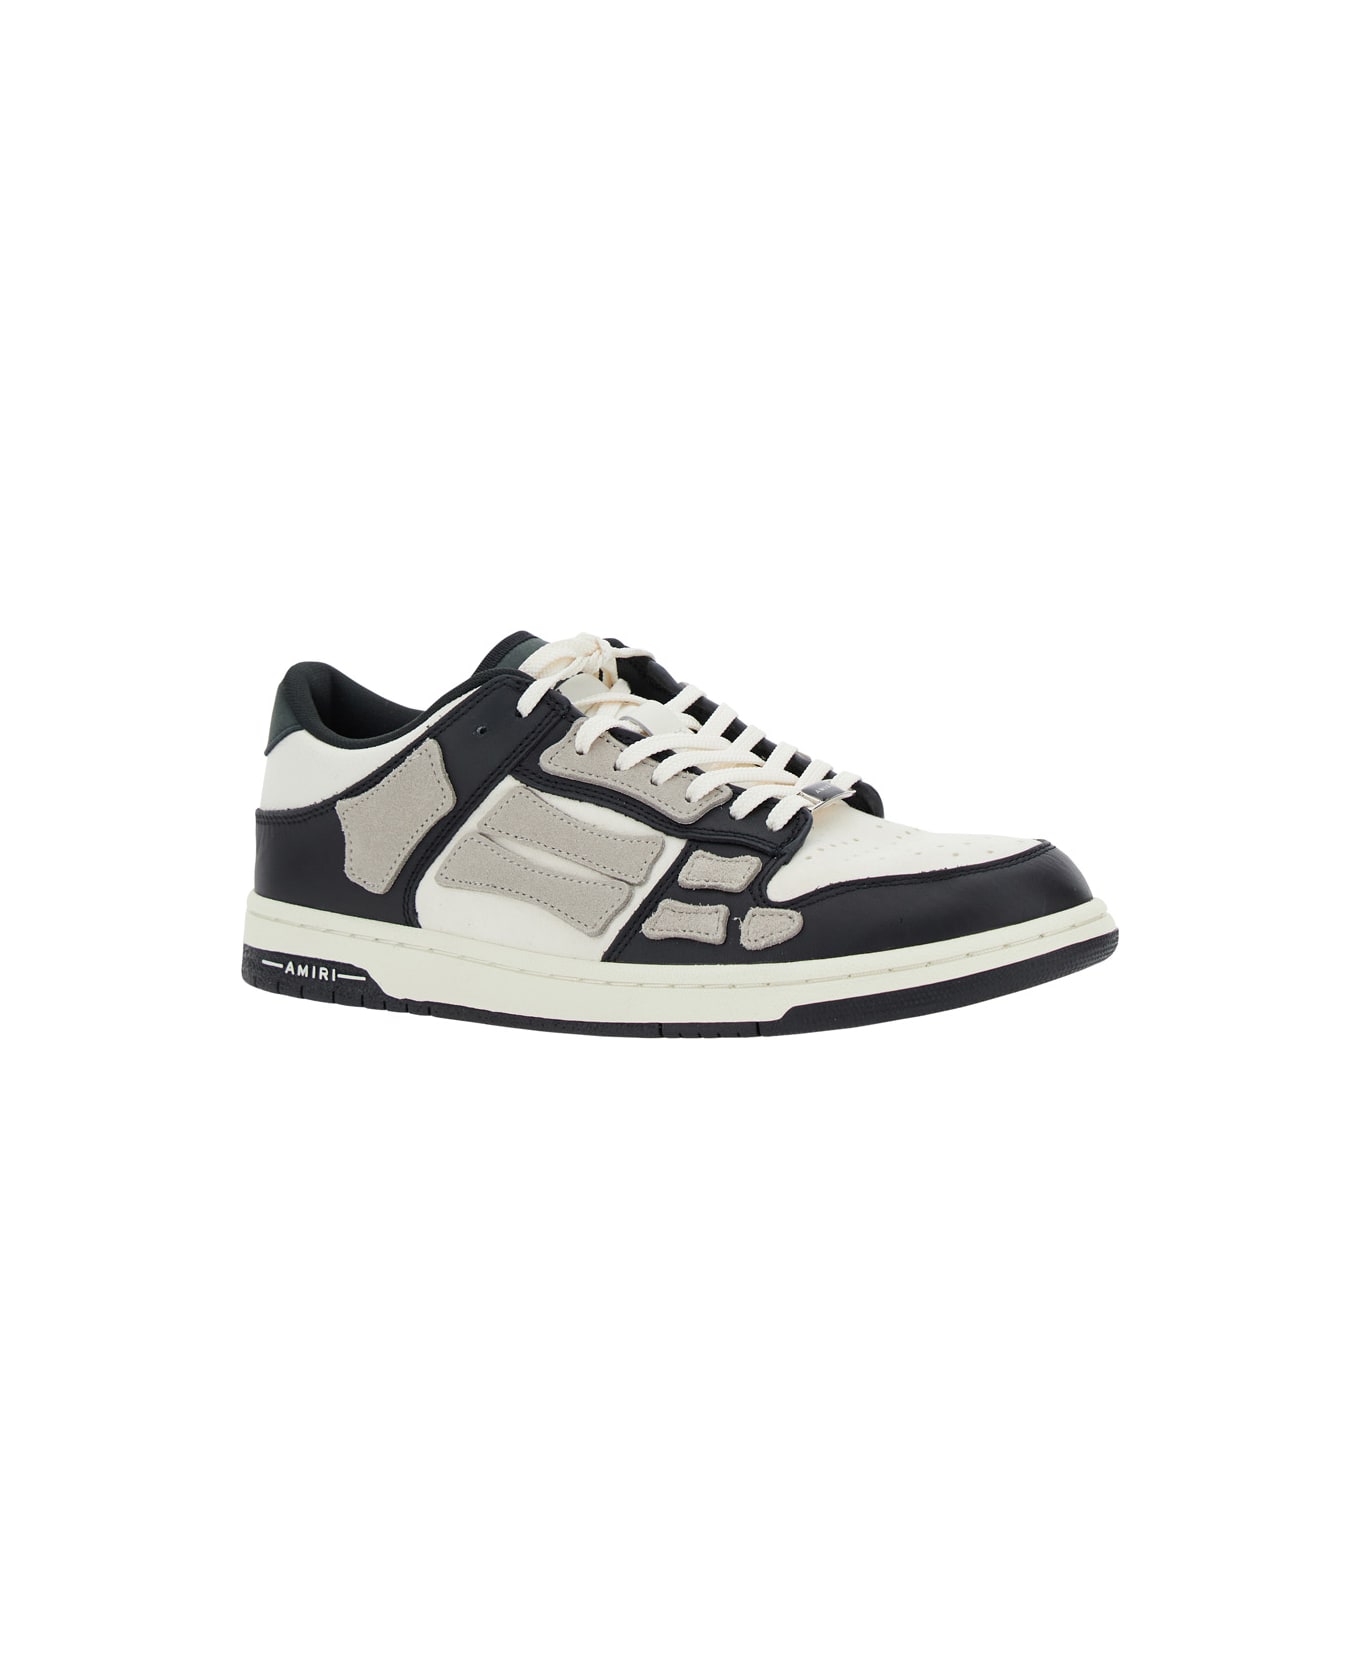 AMIRI Black And White Low Top Sneakers With Panels In Leather Man - White